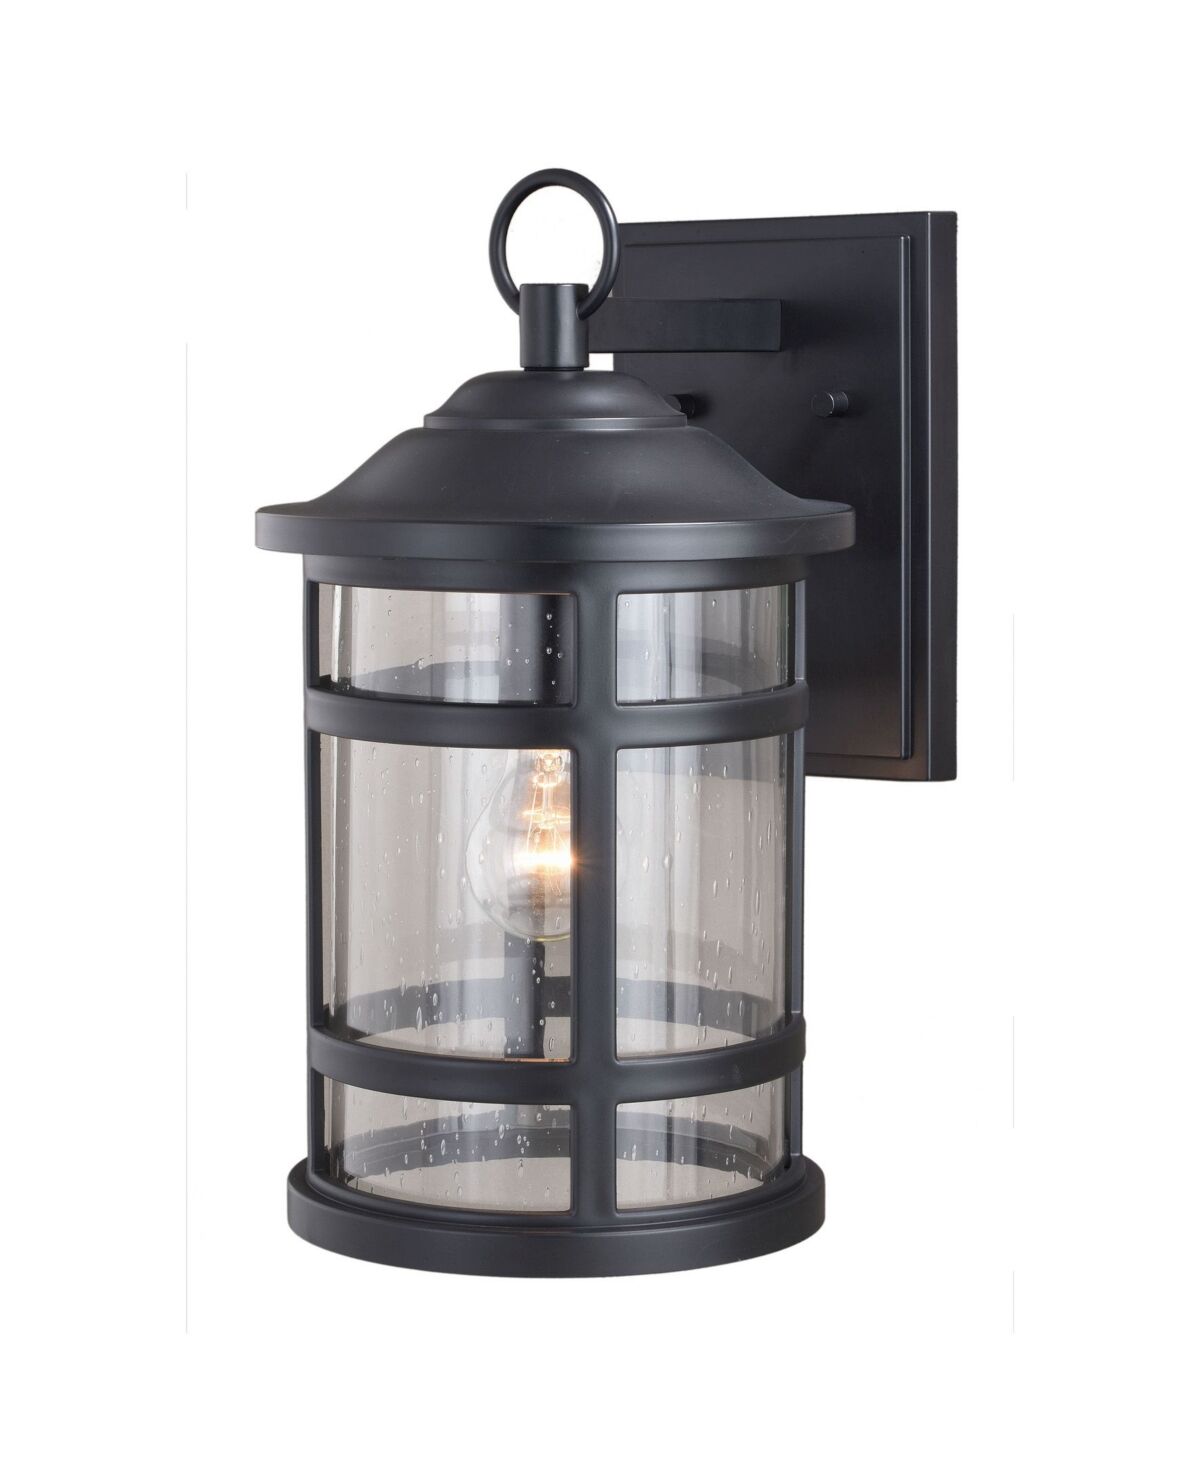 Vaxcel Southport Rust Proof Outdoor Wall Light with Clear Glass - Black